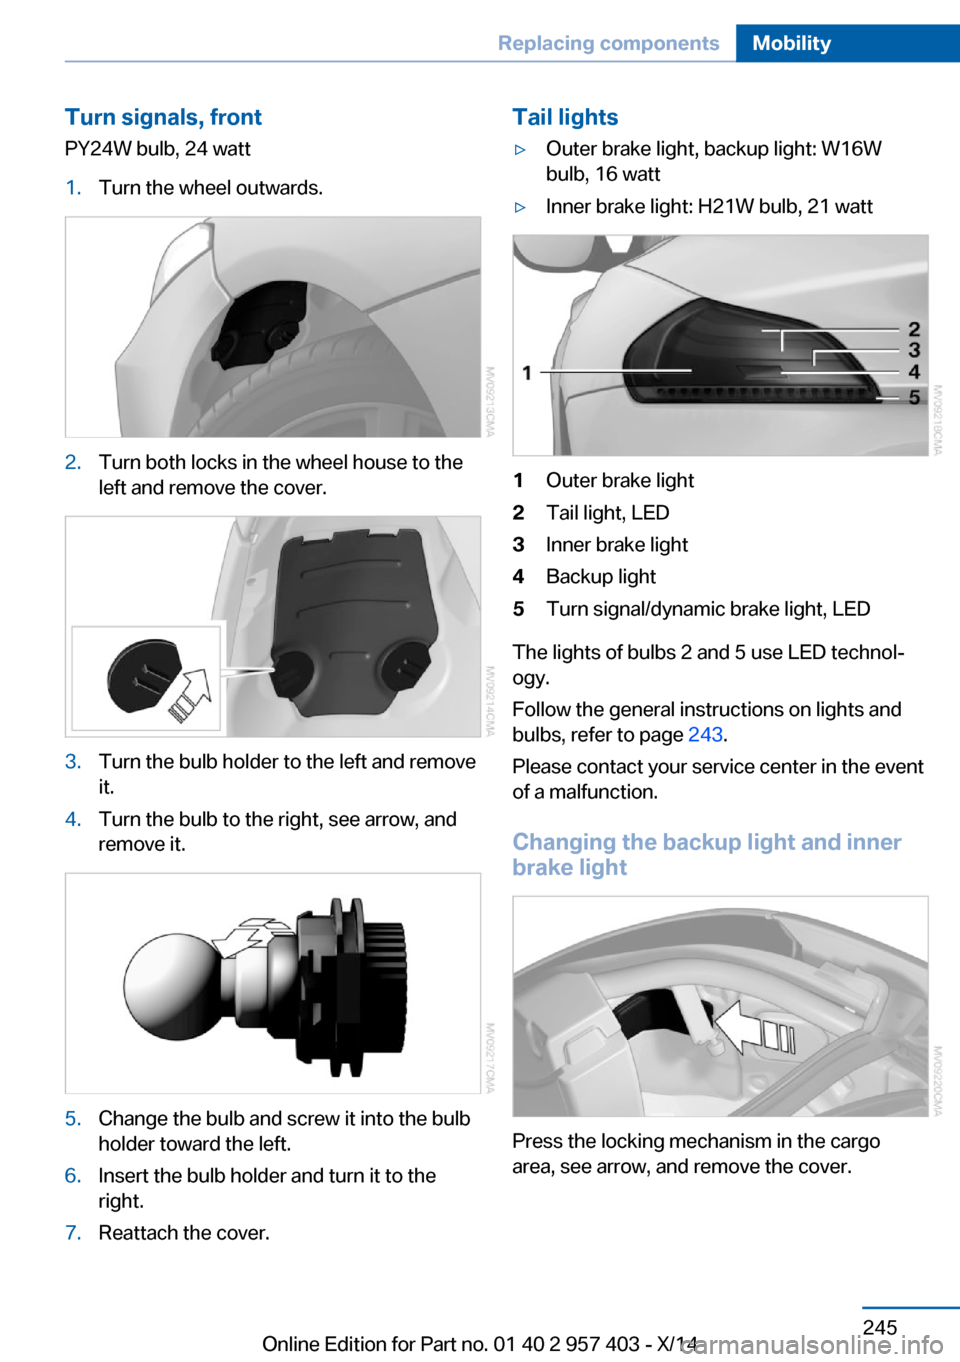 BMW Z4 2014 E89 Owners Guide Turn signals, frontPY24W bulb, 24 watt1.Turn the wheel outwards.2.Turn both locks in the wheel house to the
left and remove the cover.3.Turn the bulb holder to the left and remove
it.4.Turn the bulb t